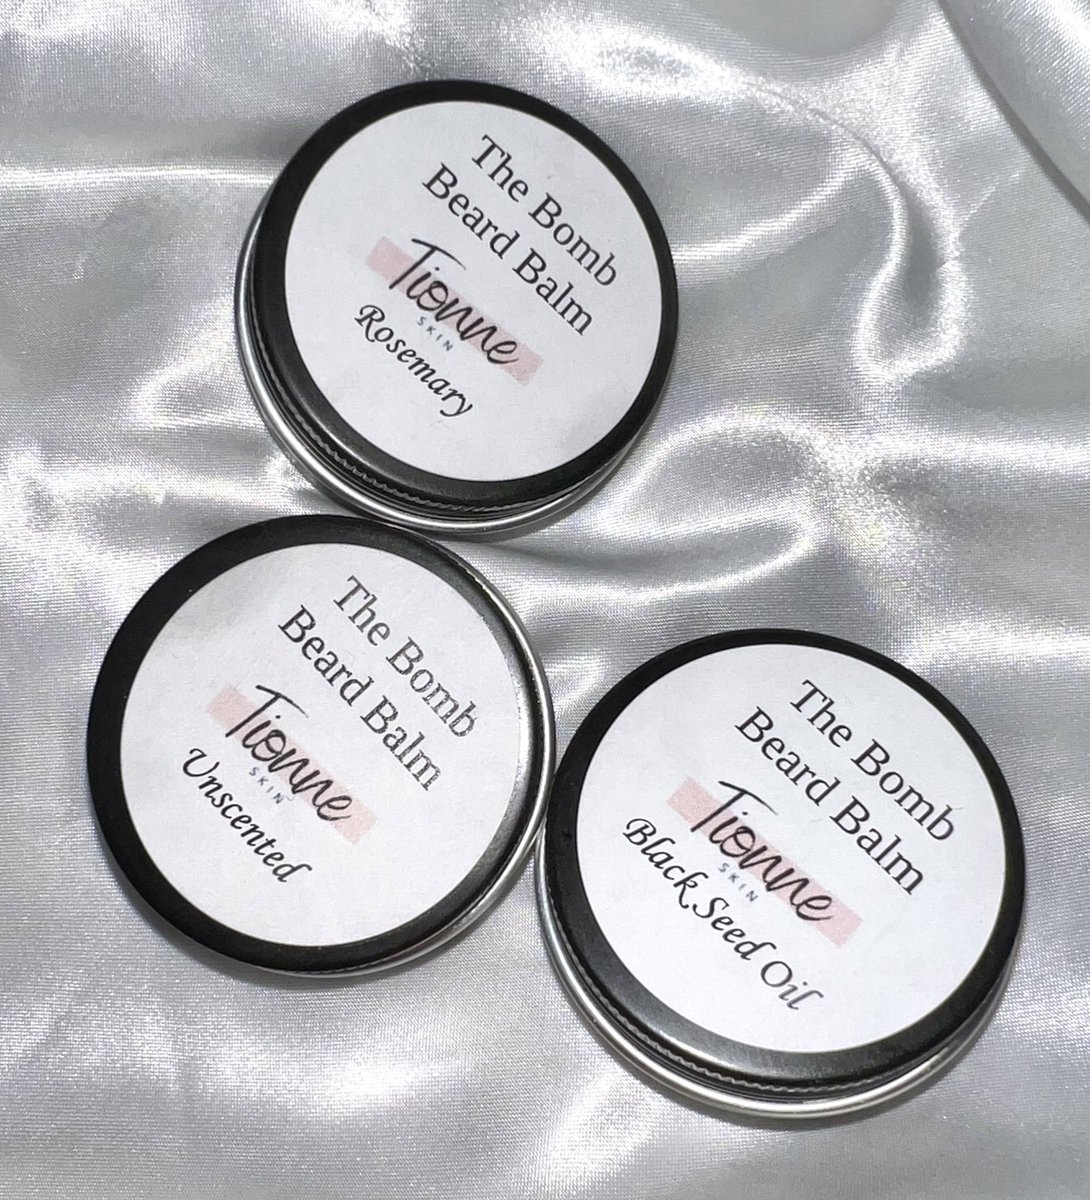 My Beard Balms moisturizes, conditions, softens and styles beards helping you achieve a healthy beard Rosemary: Made with Rosemary Essential Oil Black Seed Oil: Made with Black Seed Oil Unscented: No scent/fragrance is added Works well with my STRENGTH Hair Growth Oil